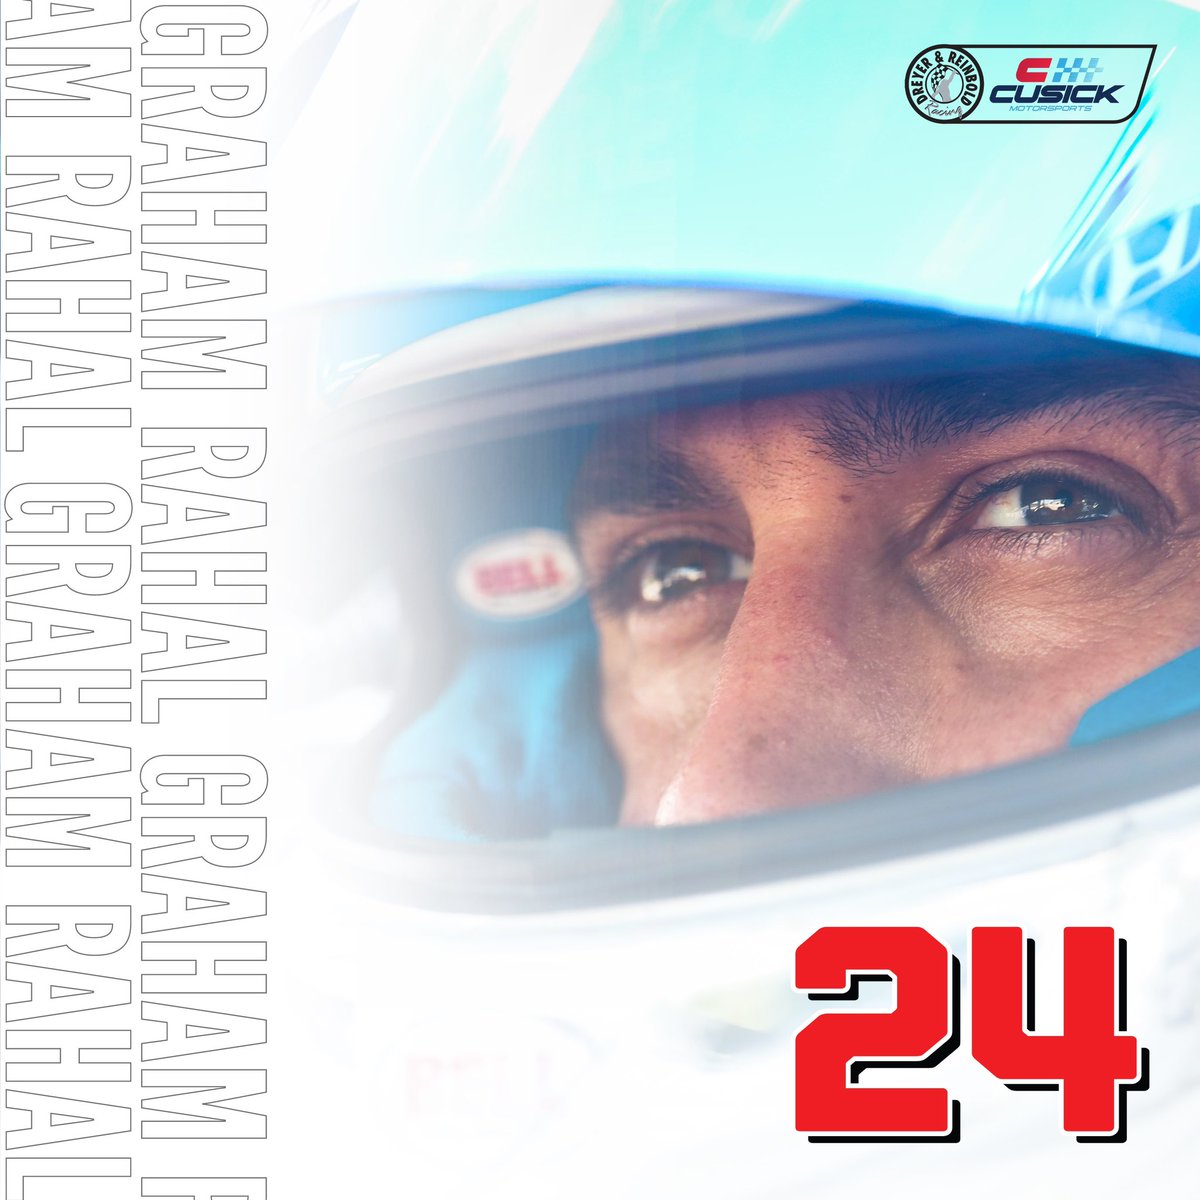 RT @tracksmackdawn: RT @DreyerReinbold: We are happy to announce that @GrahamRahal will will pilot the No. 24 in the 107th Running of Indianapolis 500! Rahal replaces Stefan Wilson who suffered an injury in yesterday’s practice session. #DrivenByDRR |…